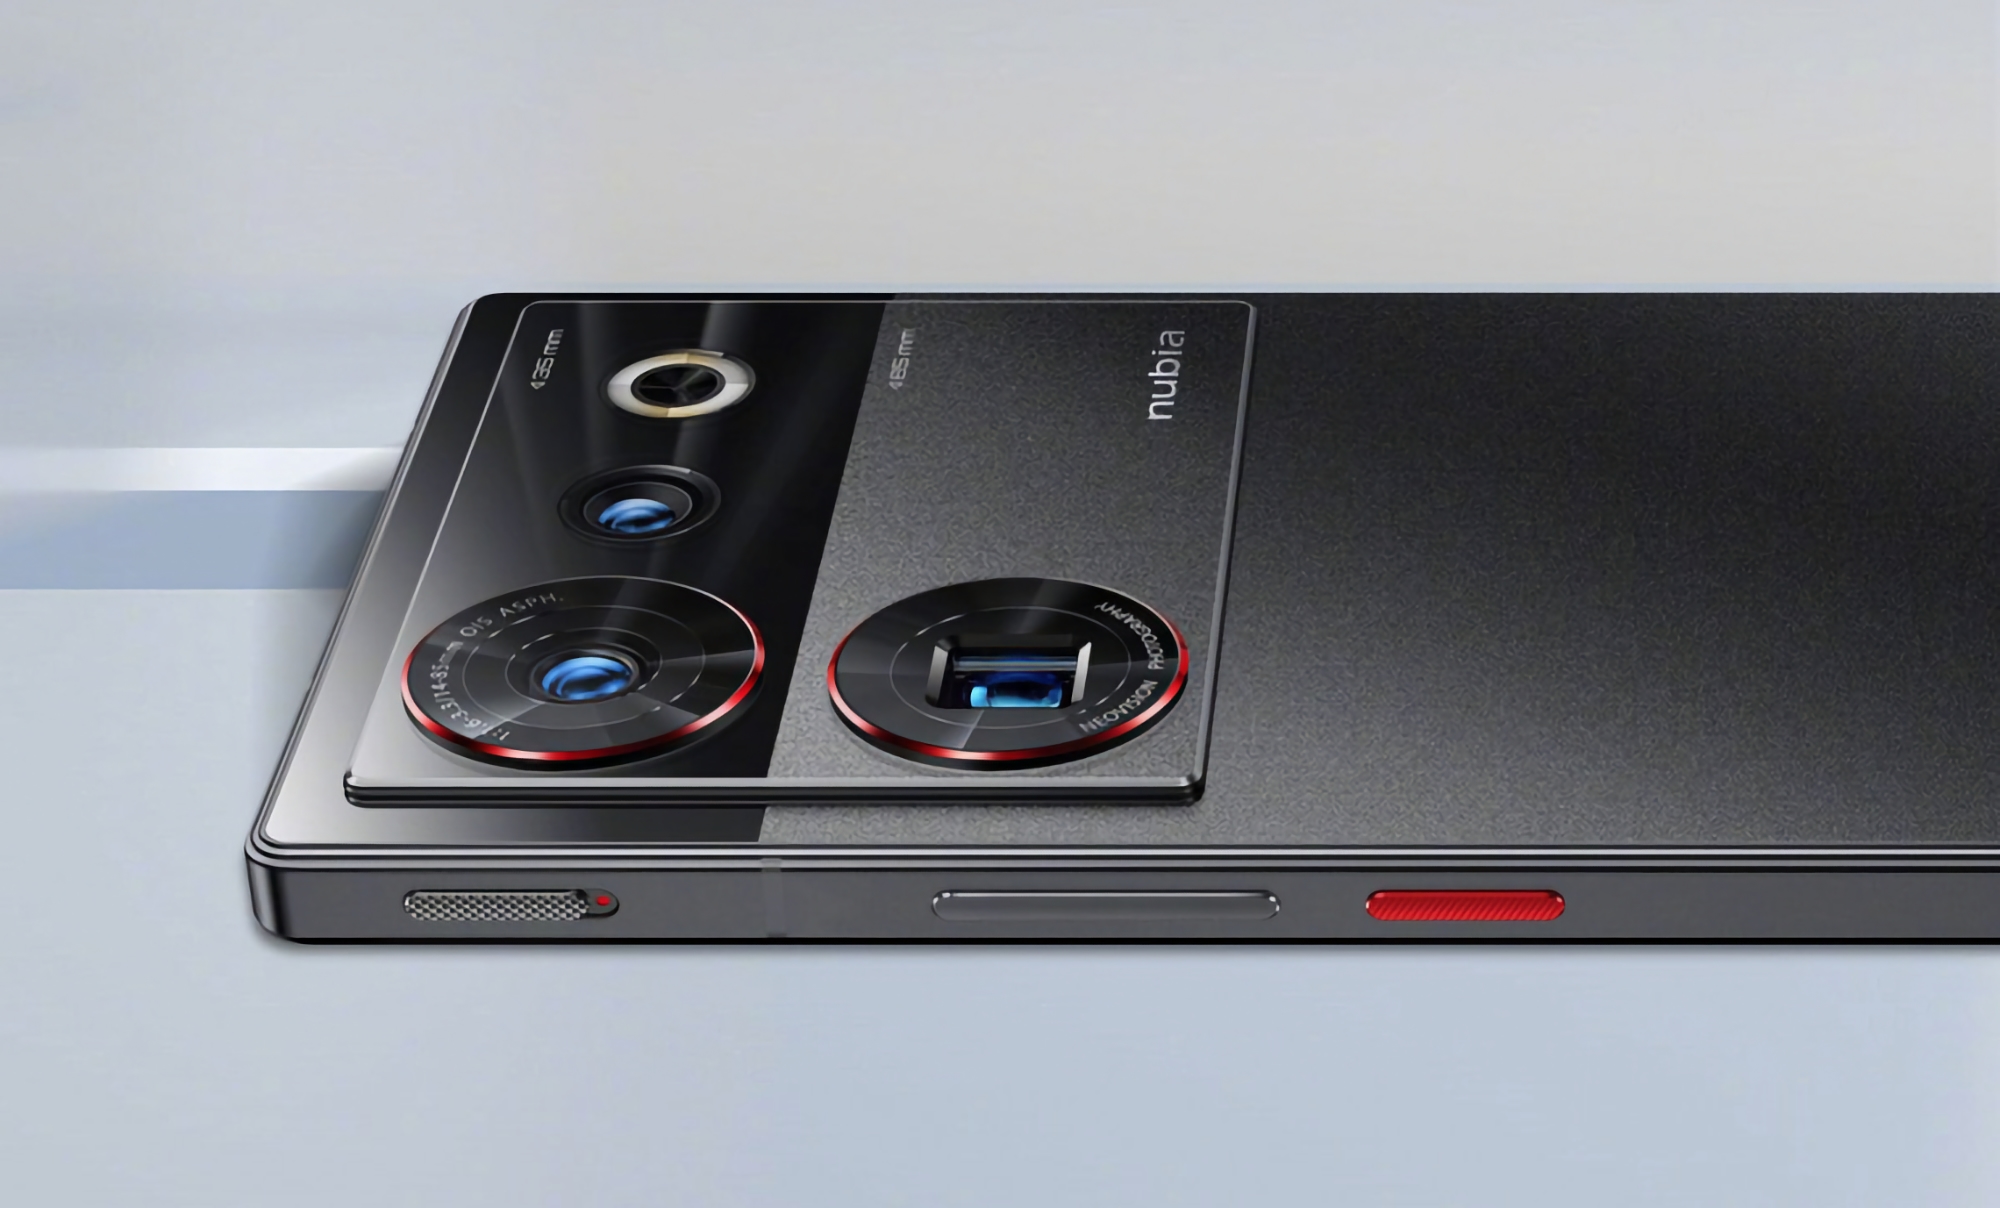 Nubia Z60 Ultra Set to launch Globally on December 19 - Tech Nukti